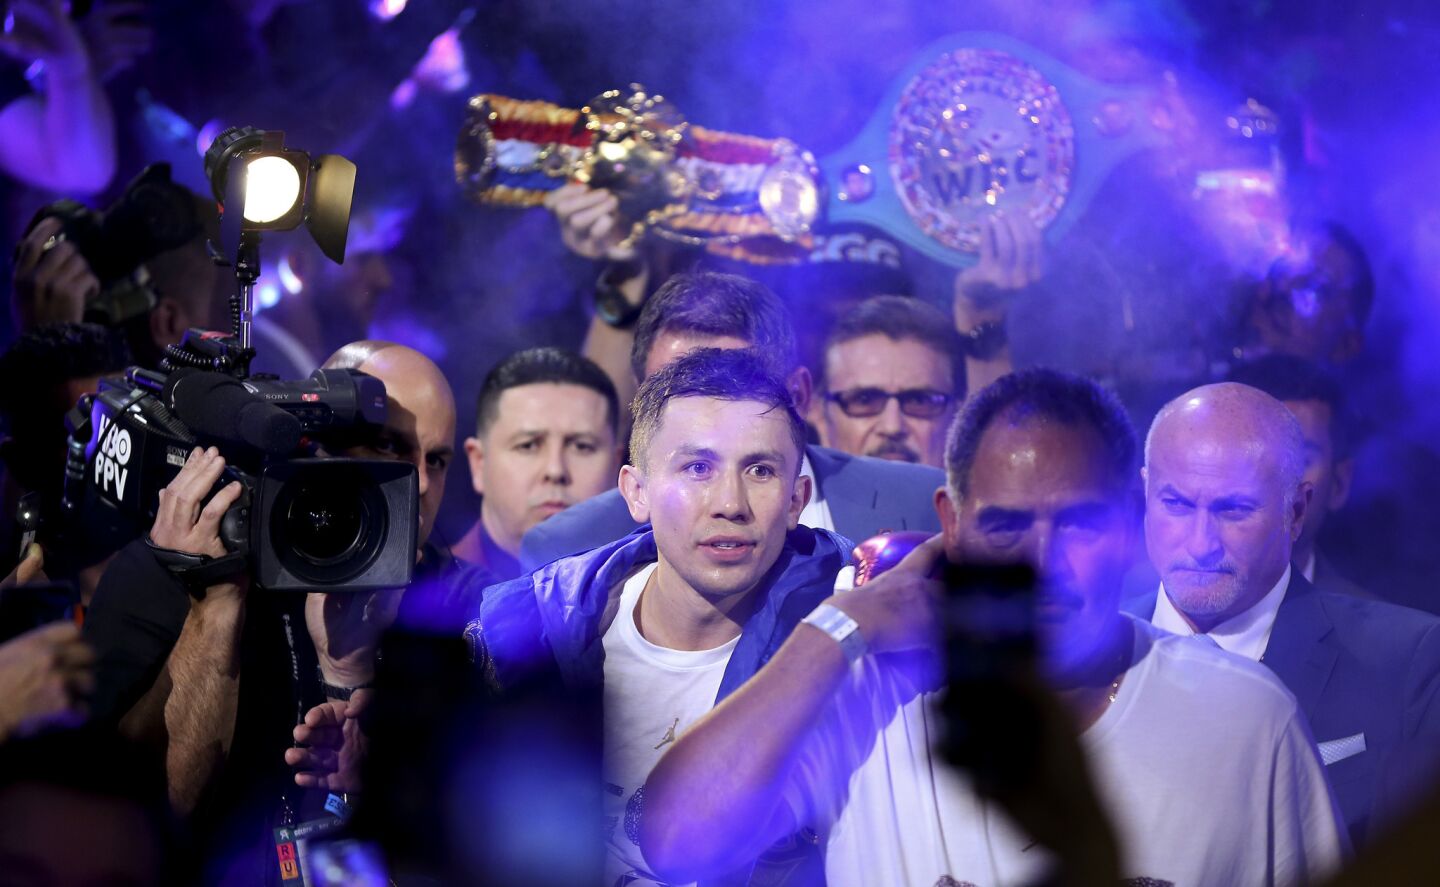 Gennady Golovkin enters T-Mobile Arena for a middleweight title boxing match against Canelo Alvarez, Saturday, Sept. 15, 2018, in Las Vegas.